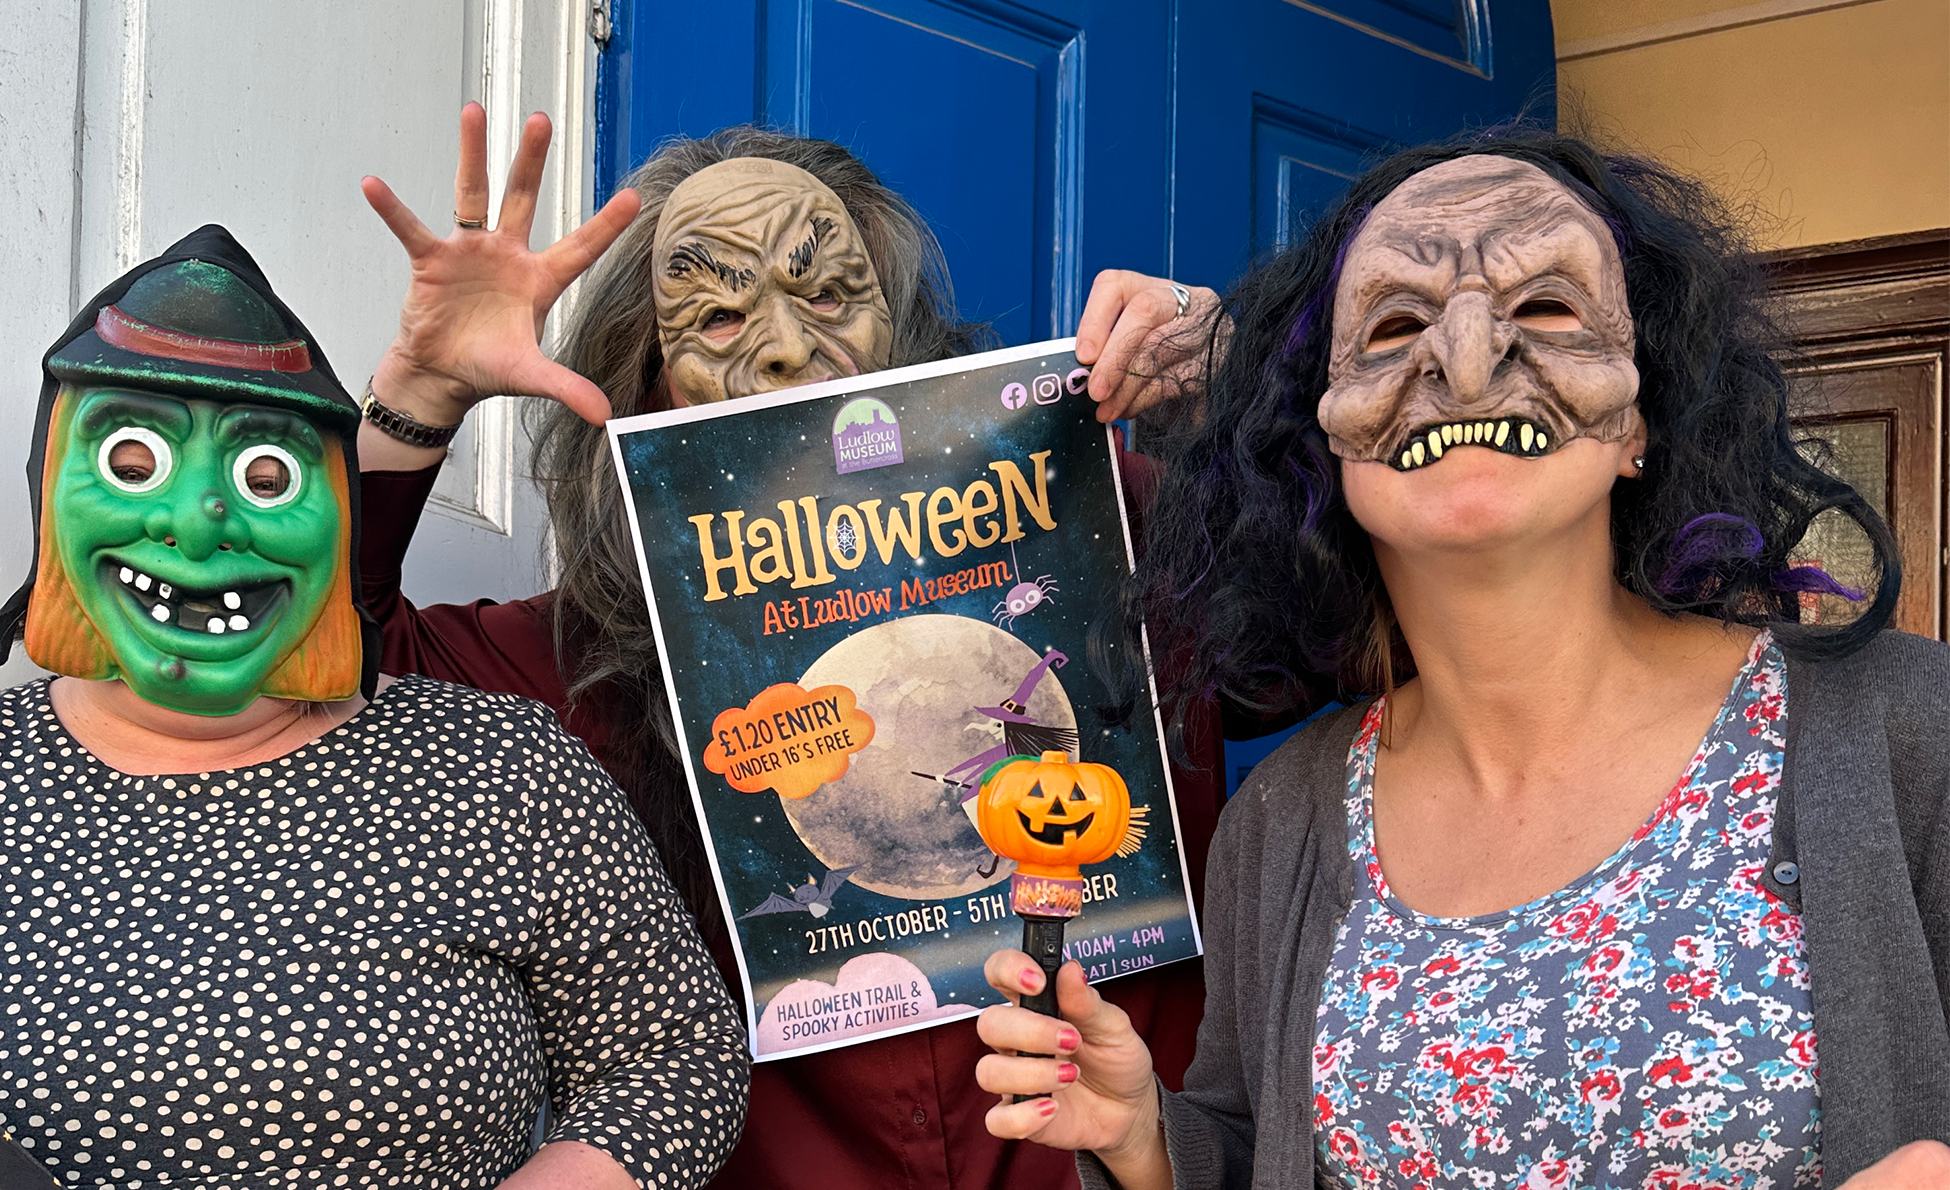 Town Council staff get ready for a spooky weekend